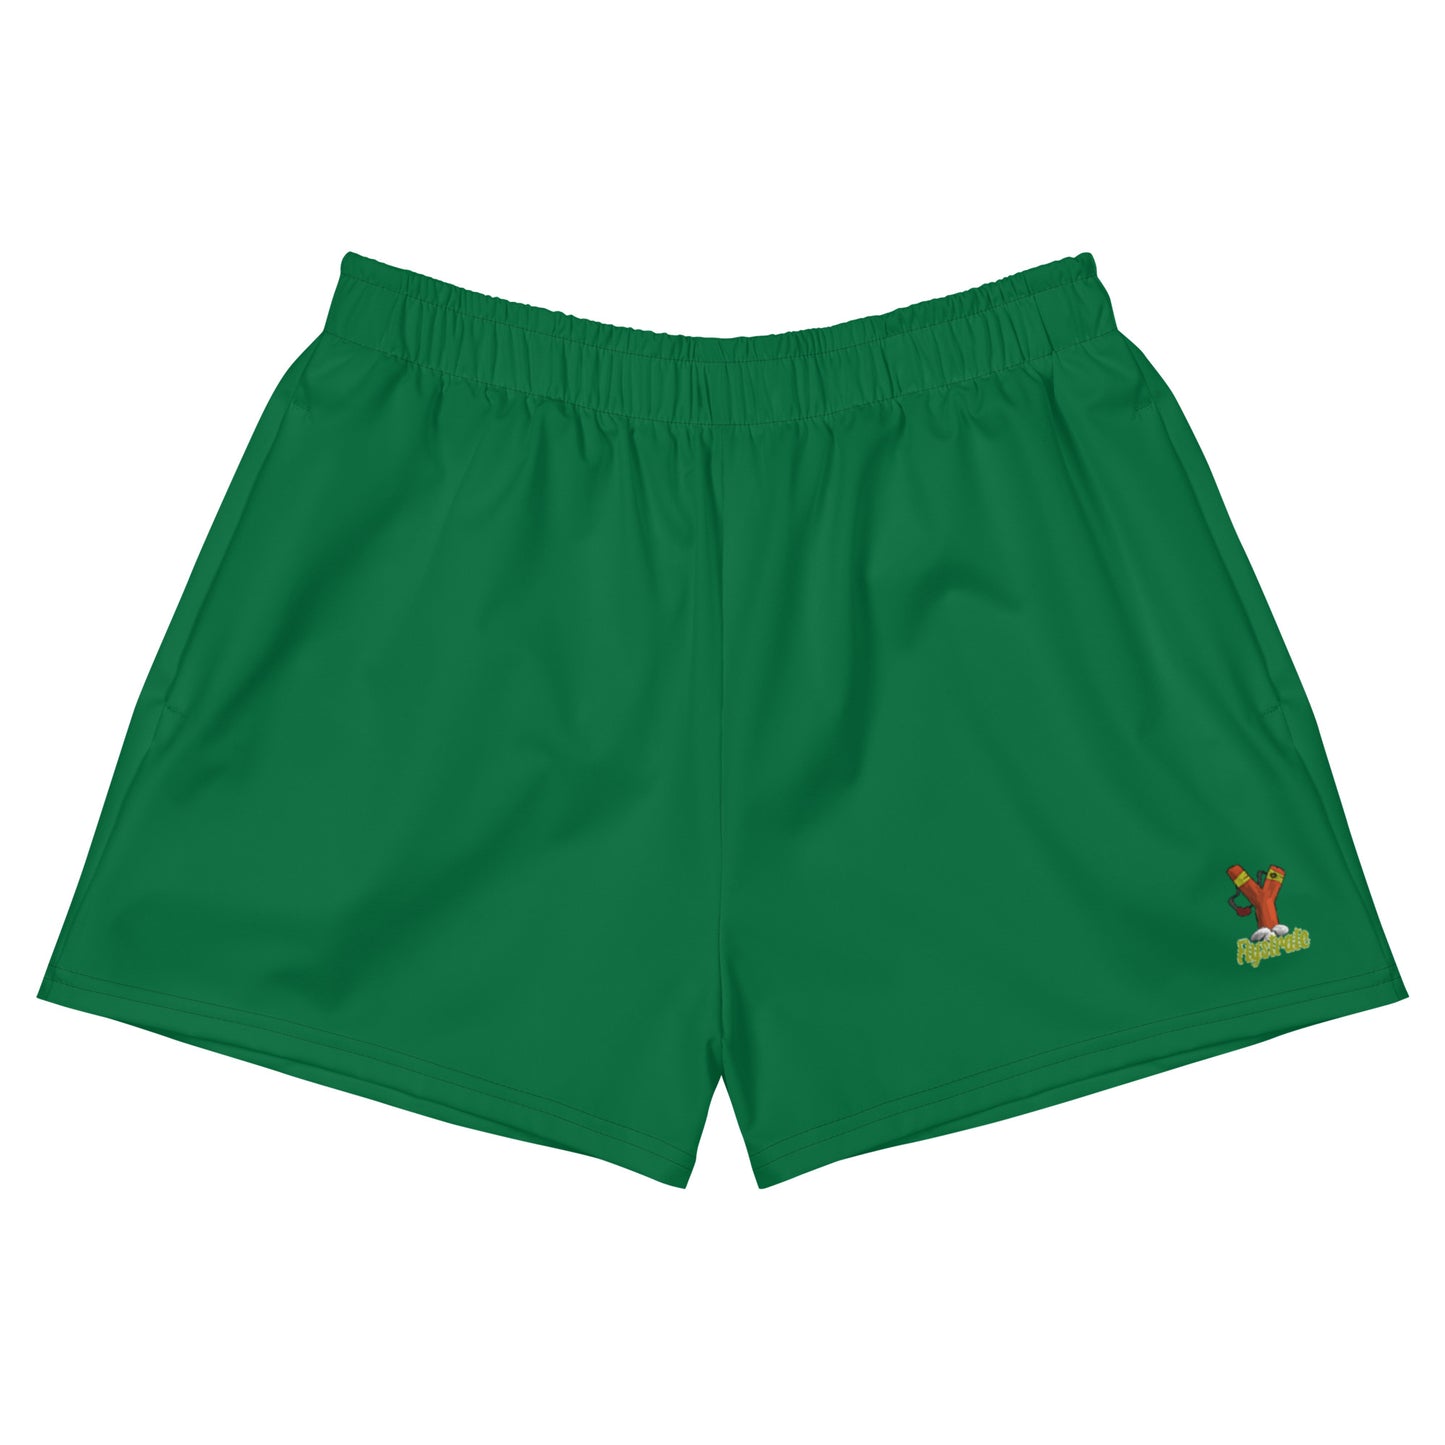 Flystrate Assets Athletic Shorts